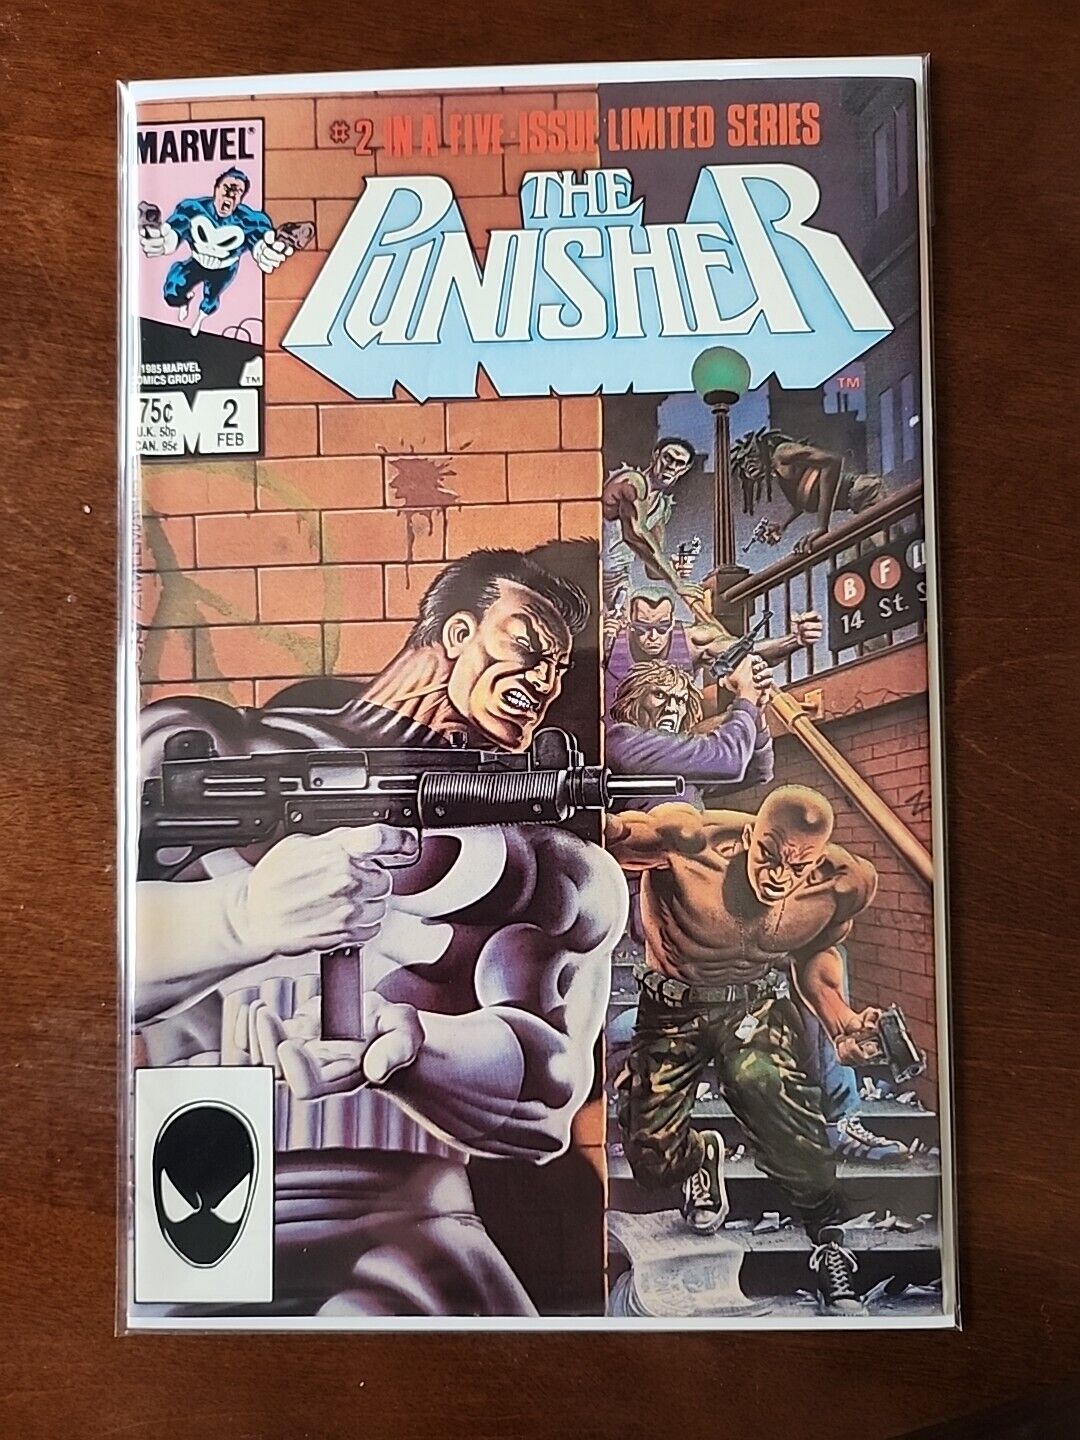 The Punisher #2 Limited Series - Zeck - 1985 